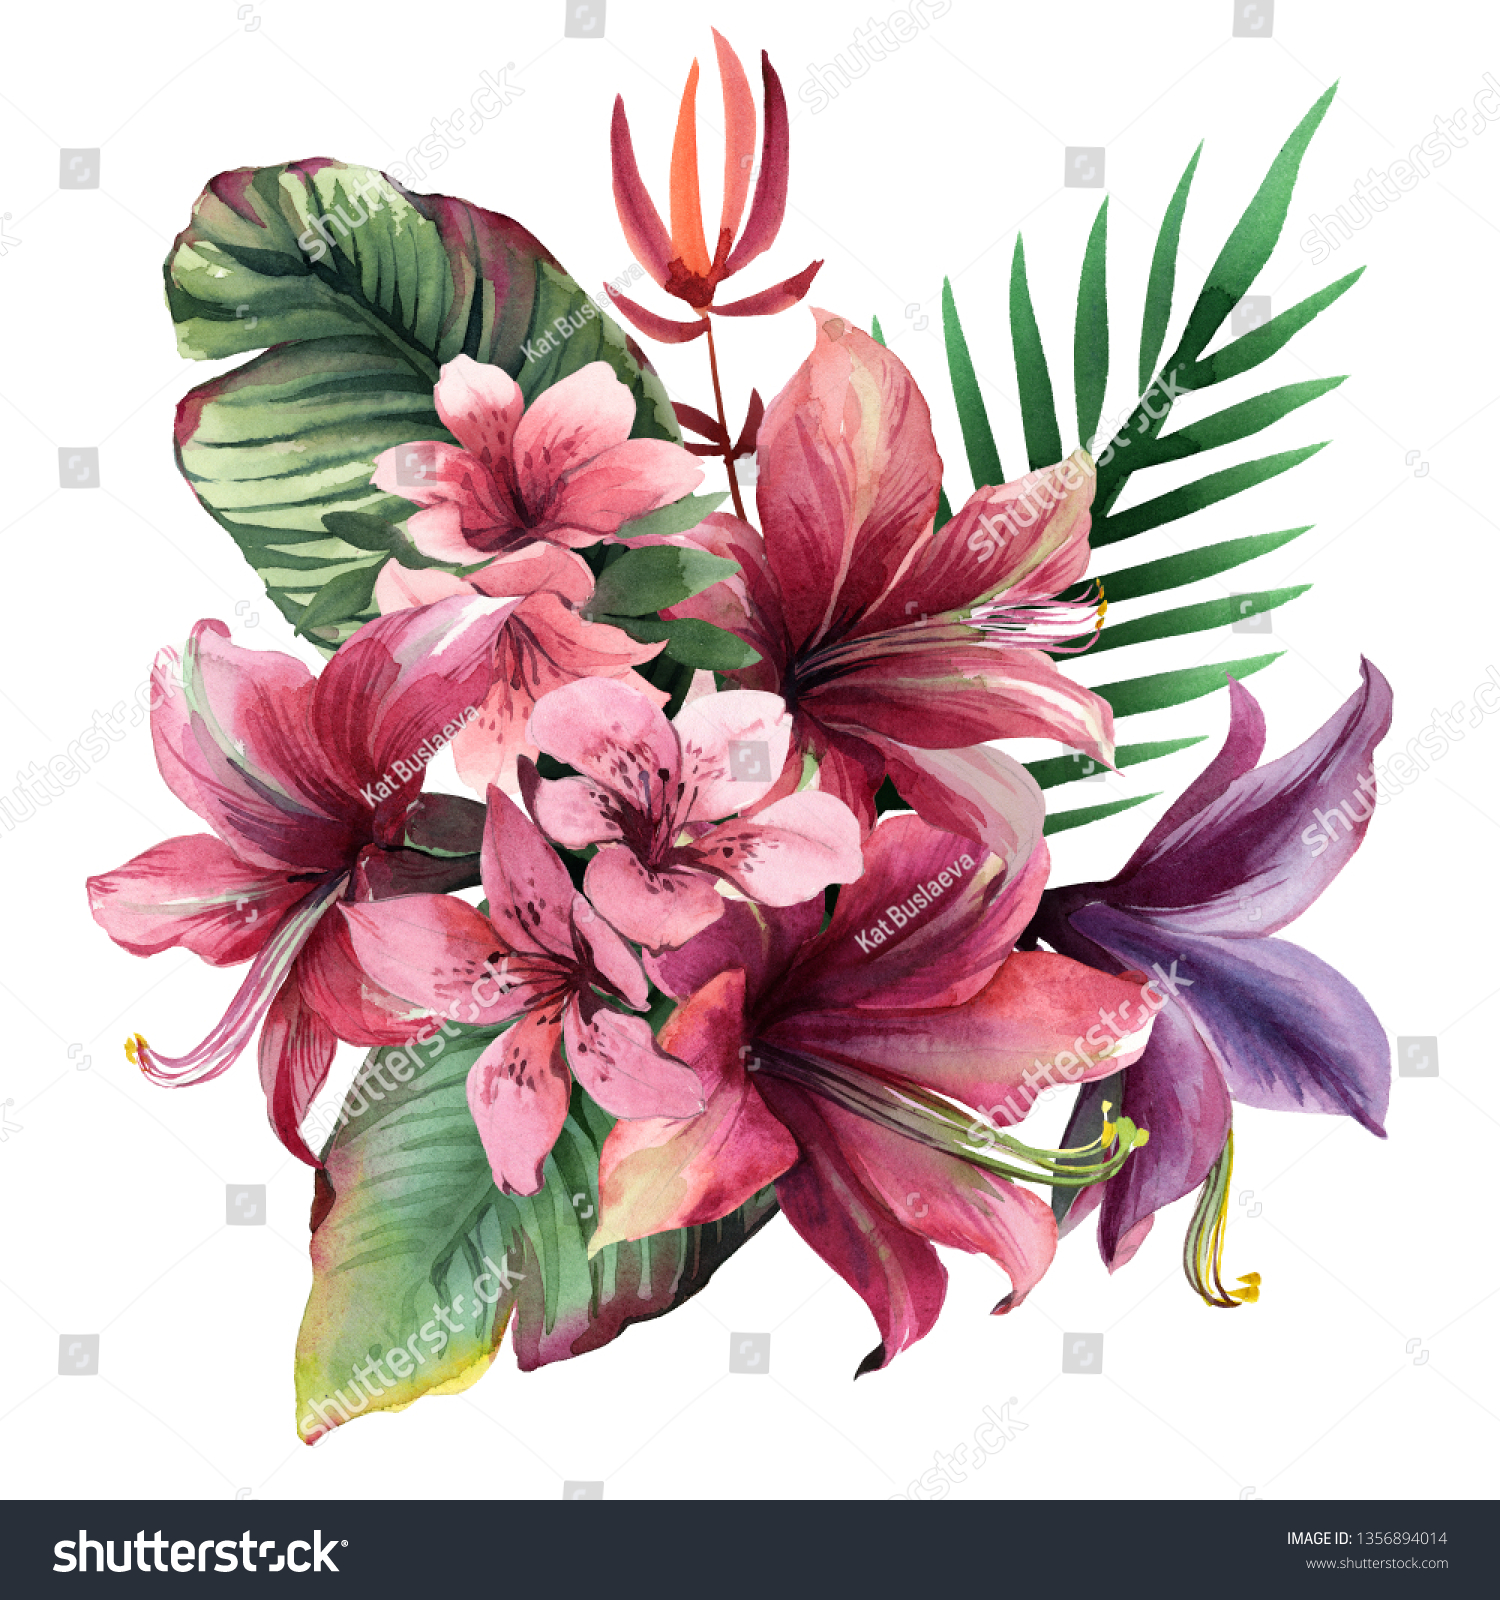 Watercolor Bouquet Tropical Flowers Leaves Isolated Stock Illustration 1356894014